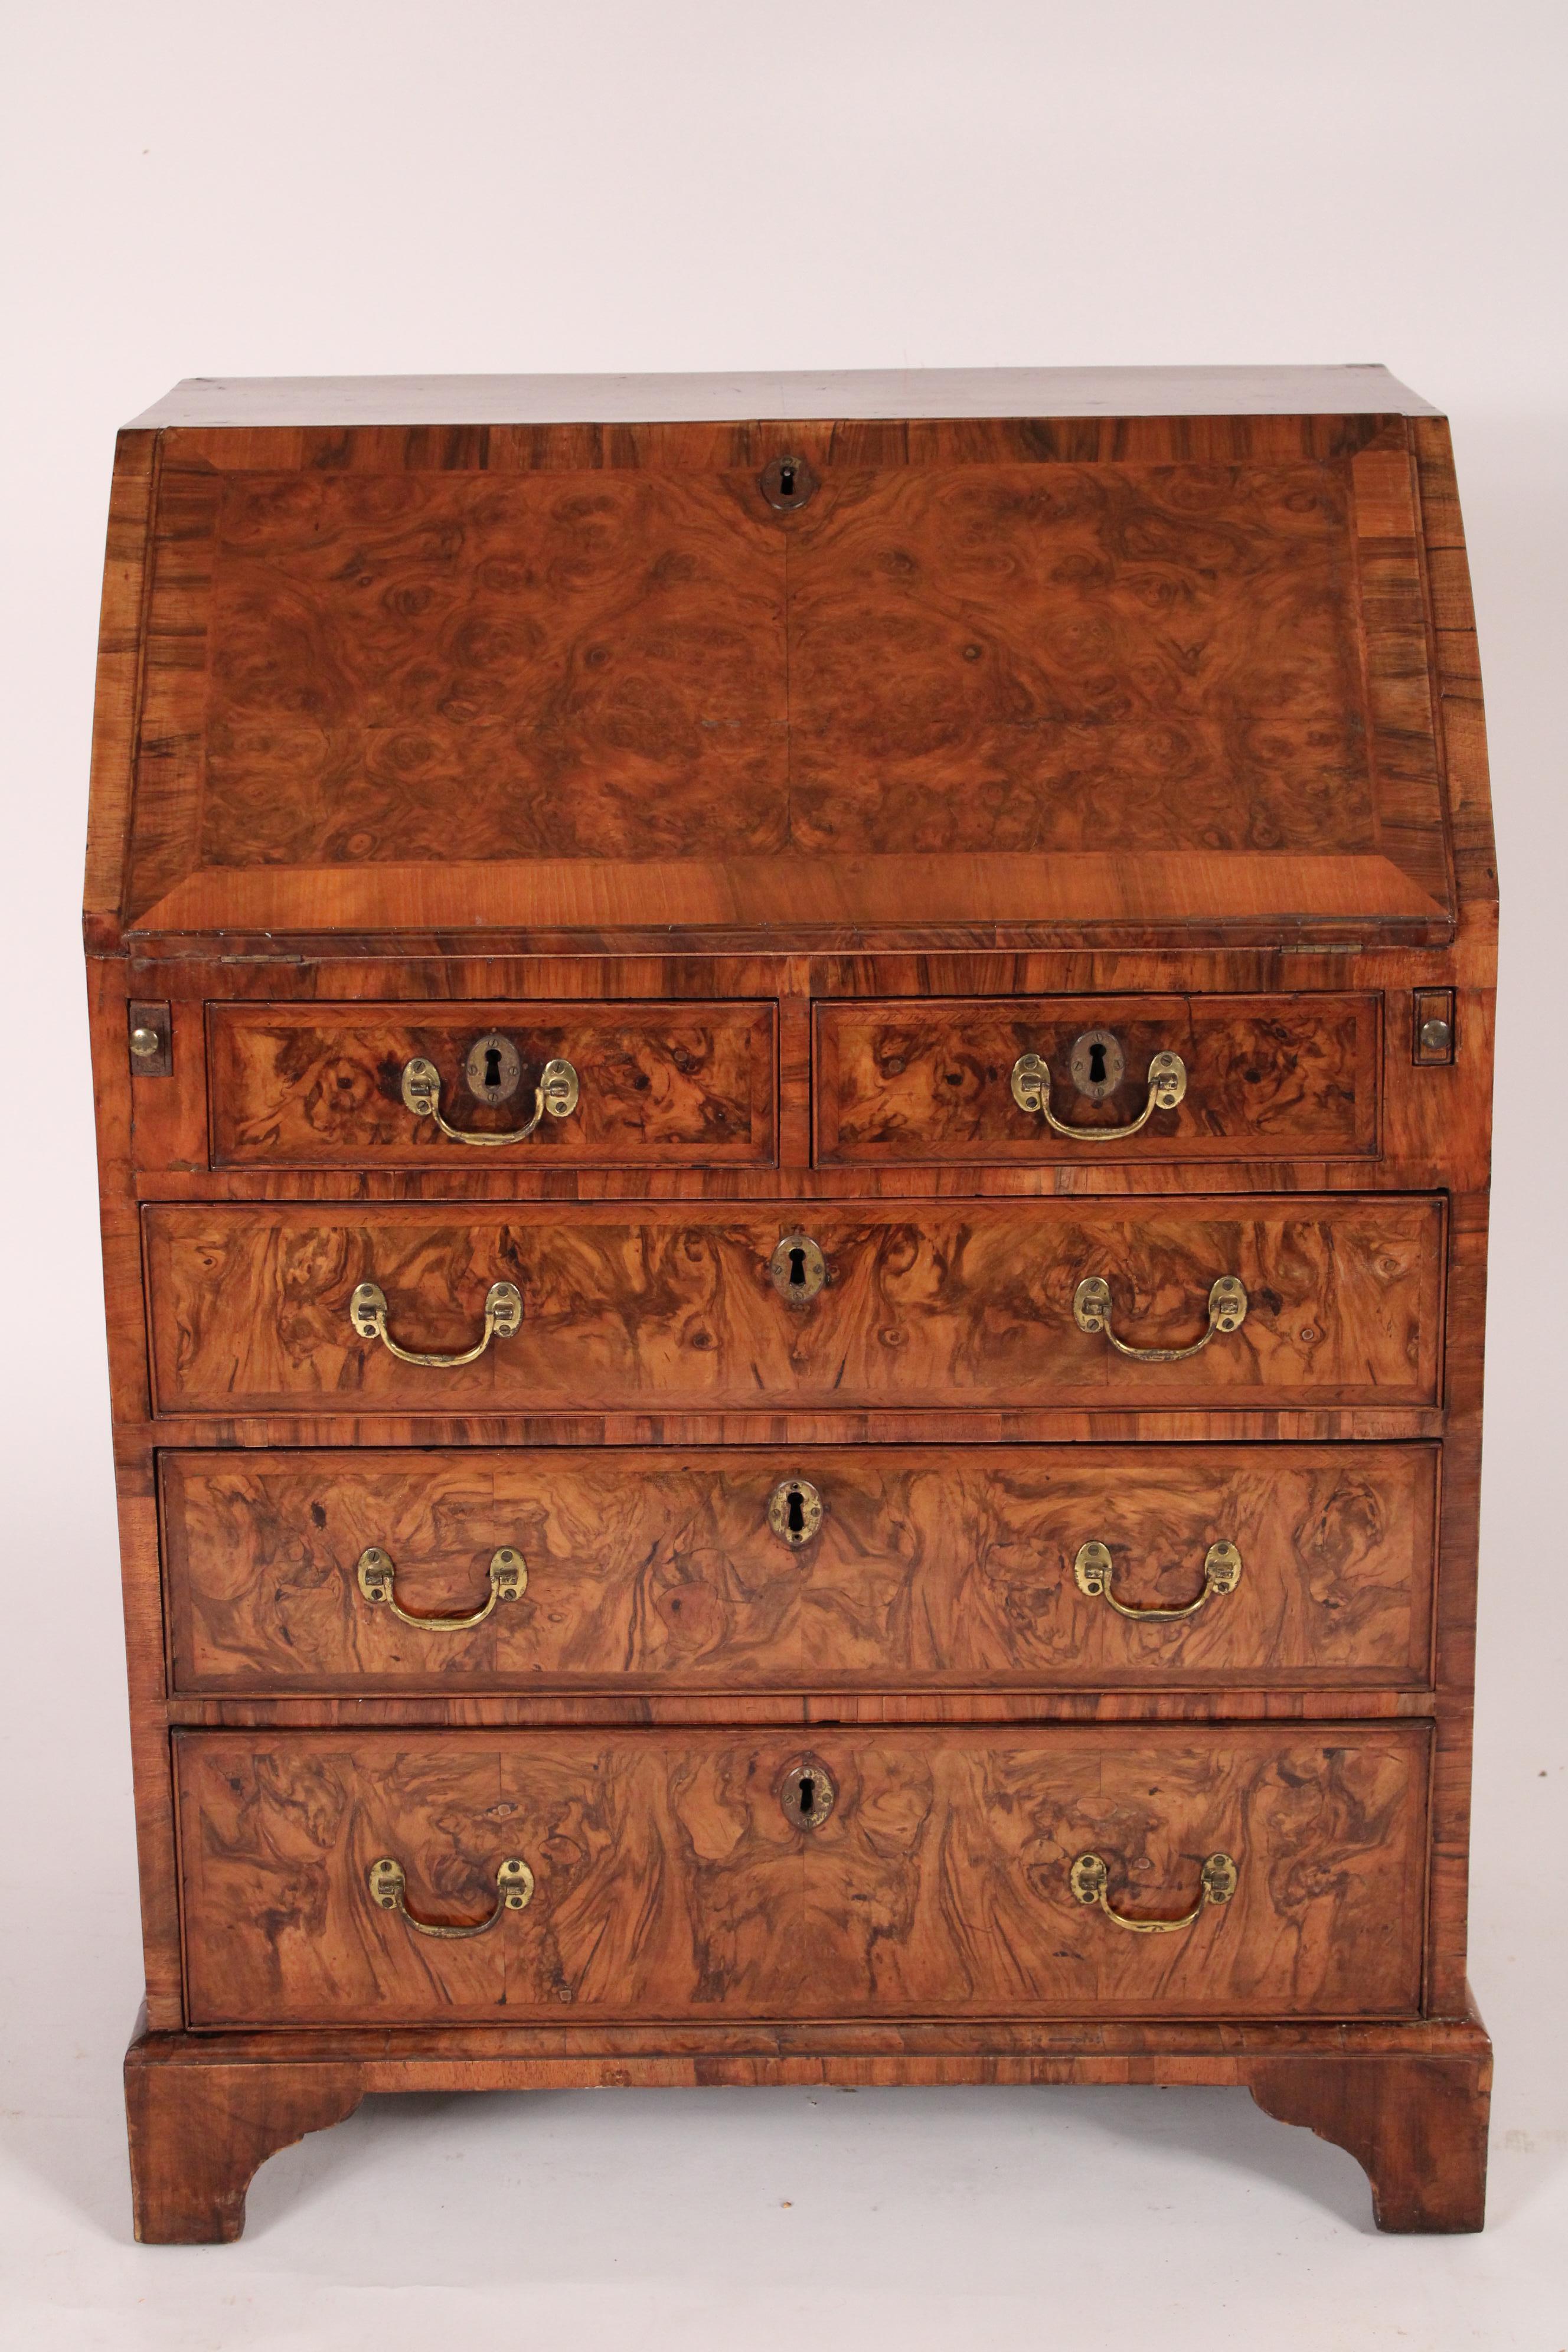 Antique George II style burl walnut and walnut slant top desk, late 19th century. With a burled walnut top, burled walnut slant top with herringbone inlay, when the slant top is opened there is a leather writing surface a long central drawer flanked